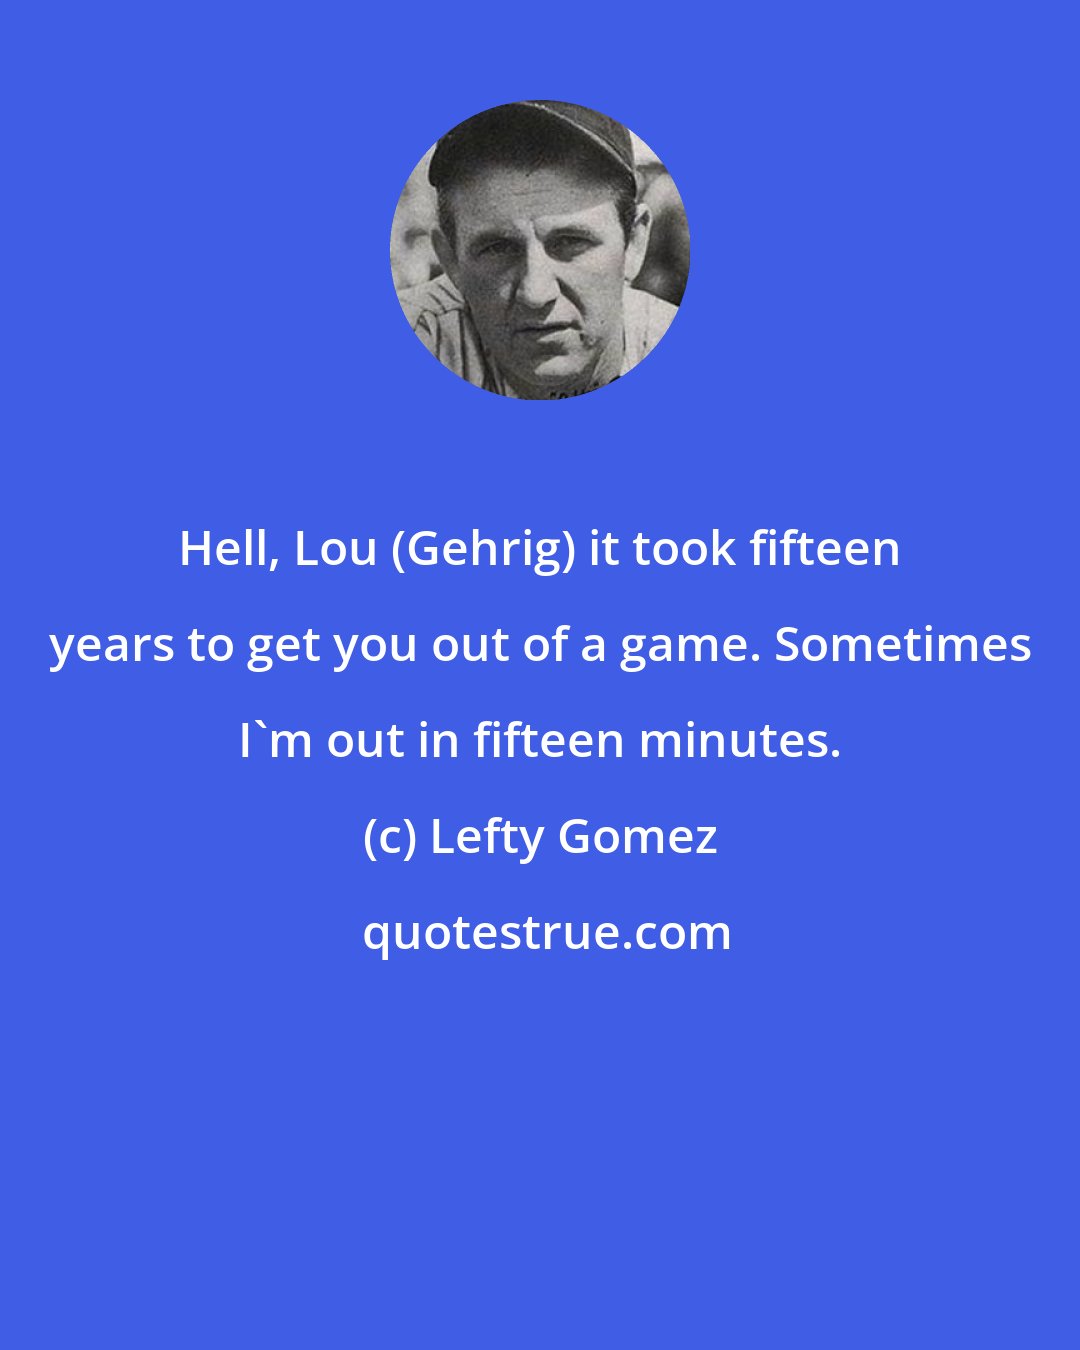 Lefty Gomez: Hell, Lou (Gehrig) it took fifteen years to get you out of a game. Sometimes I'm out in fifteen minutes.